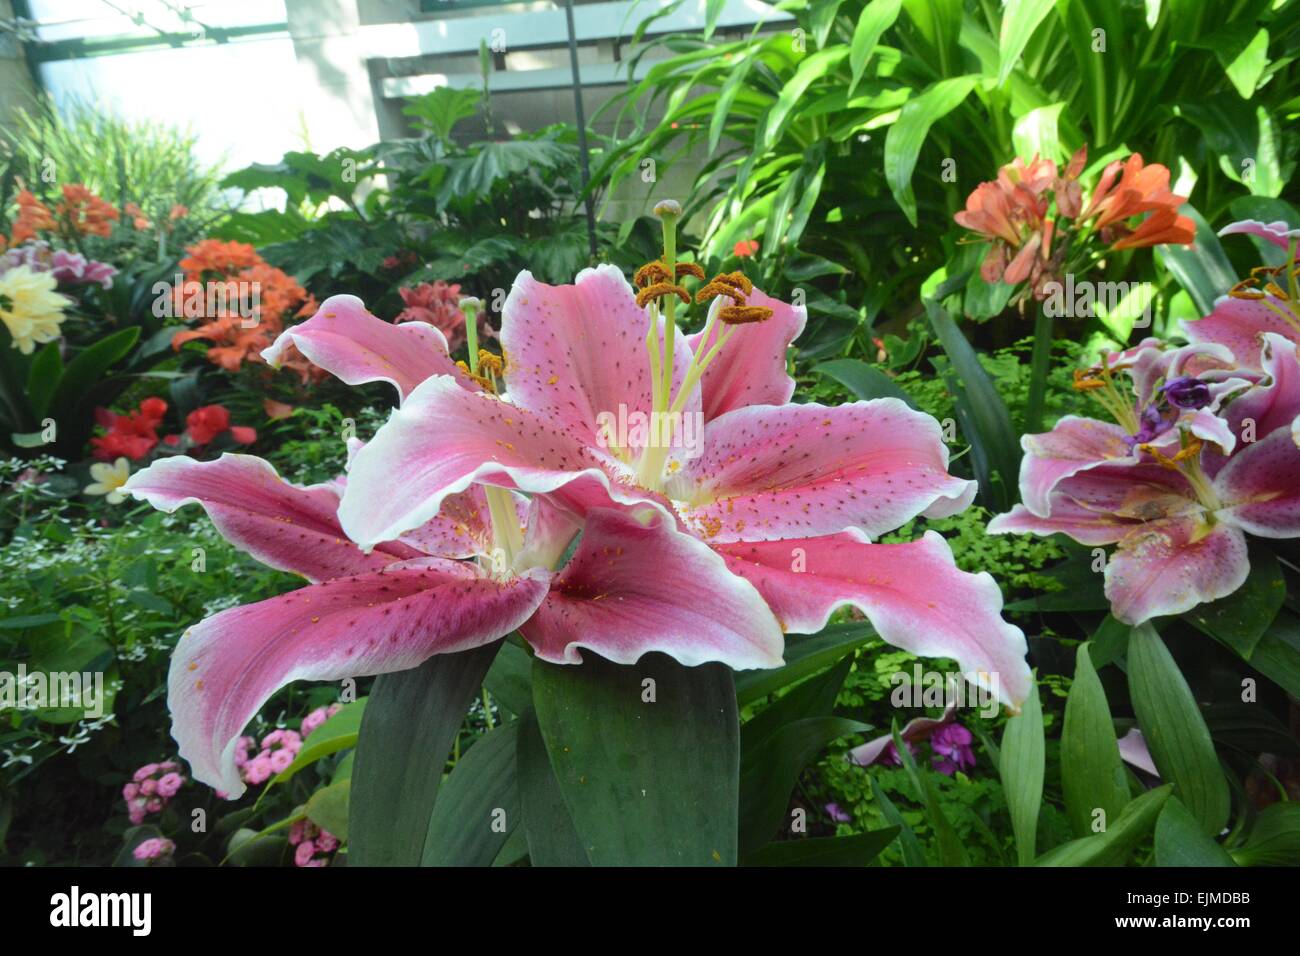 Pink and White Lilies Albuquerque, New Mexico - USA Stock Photo